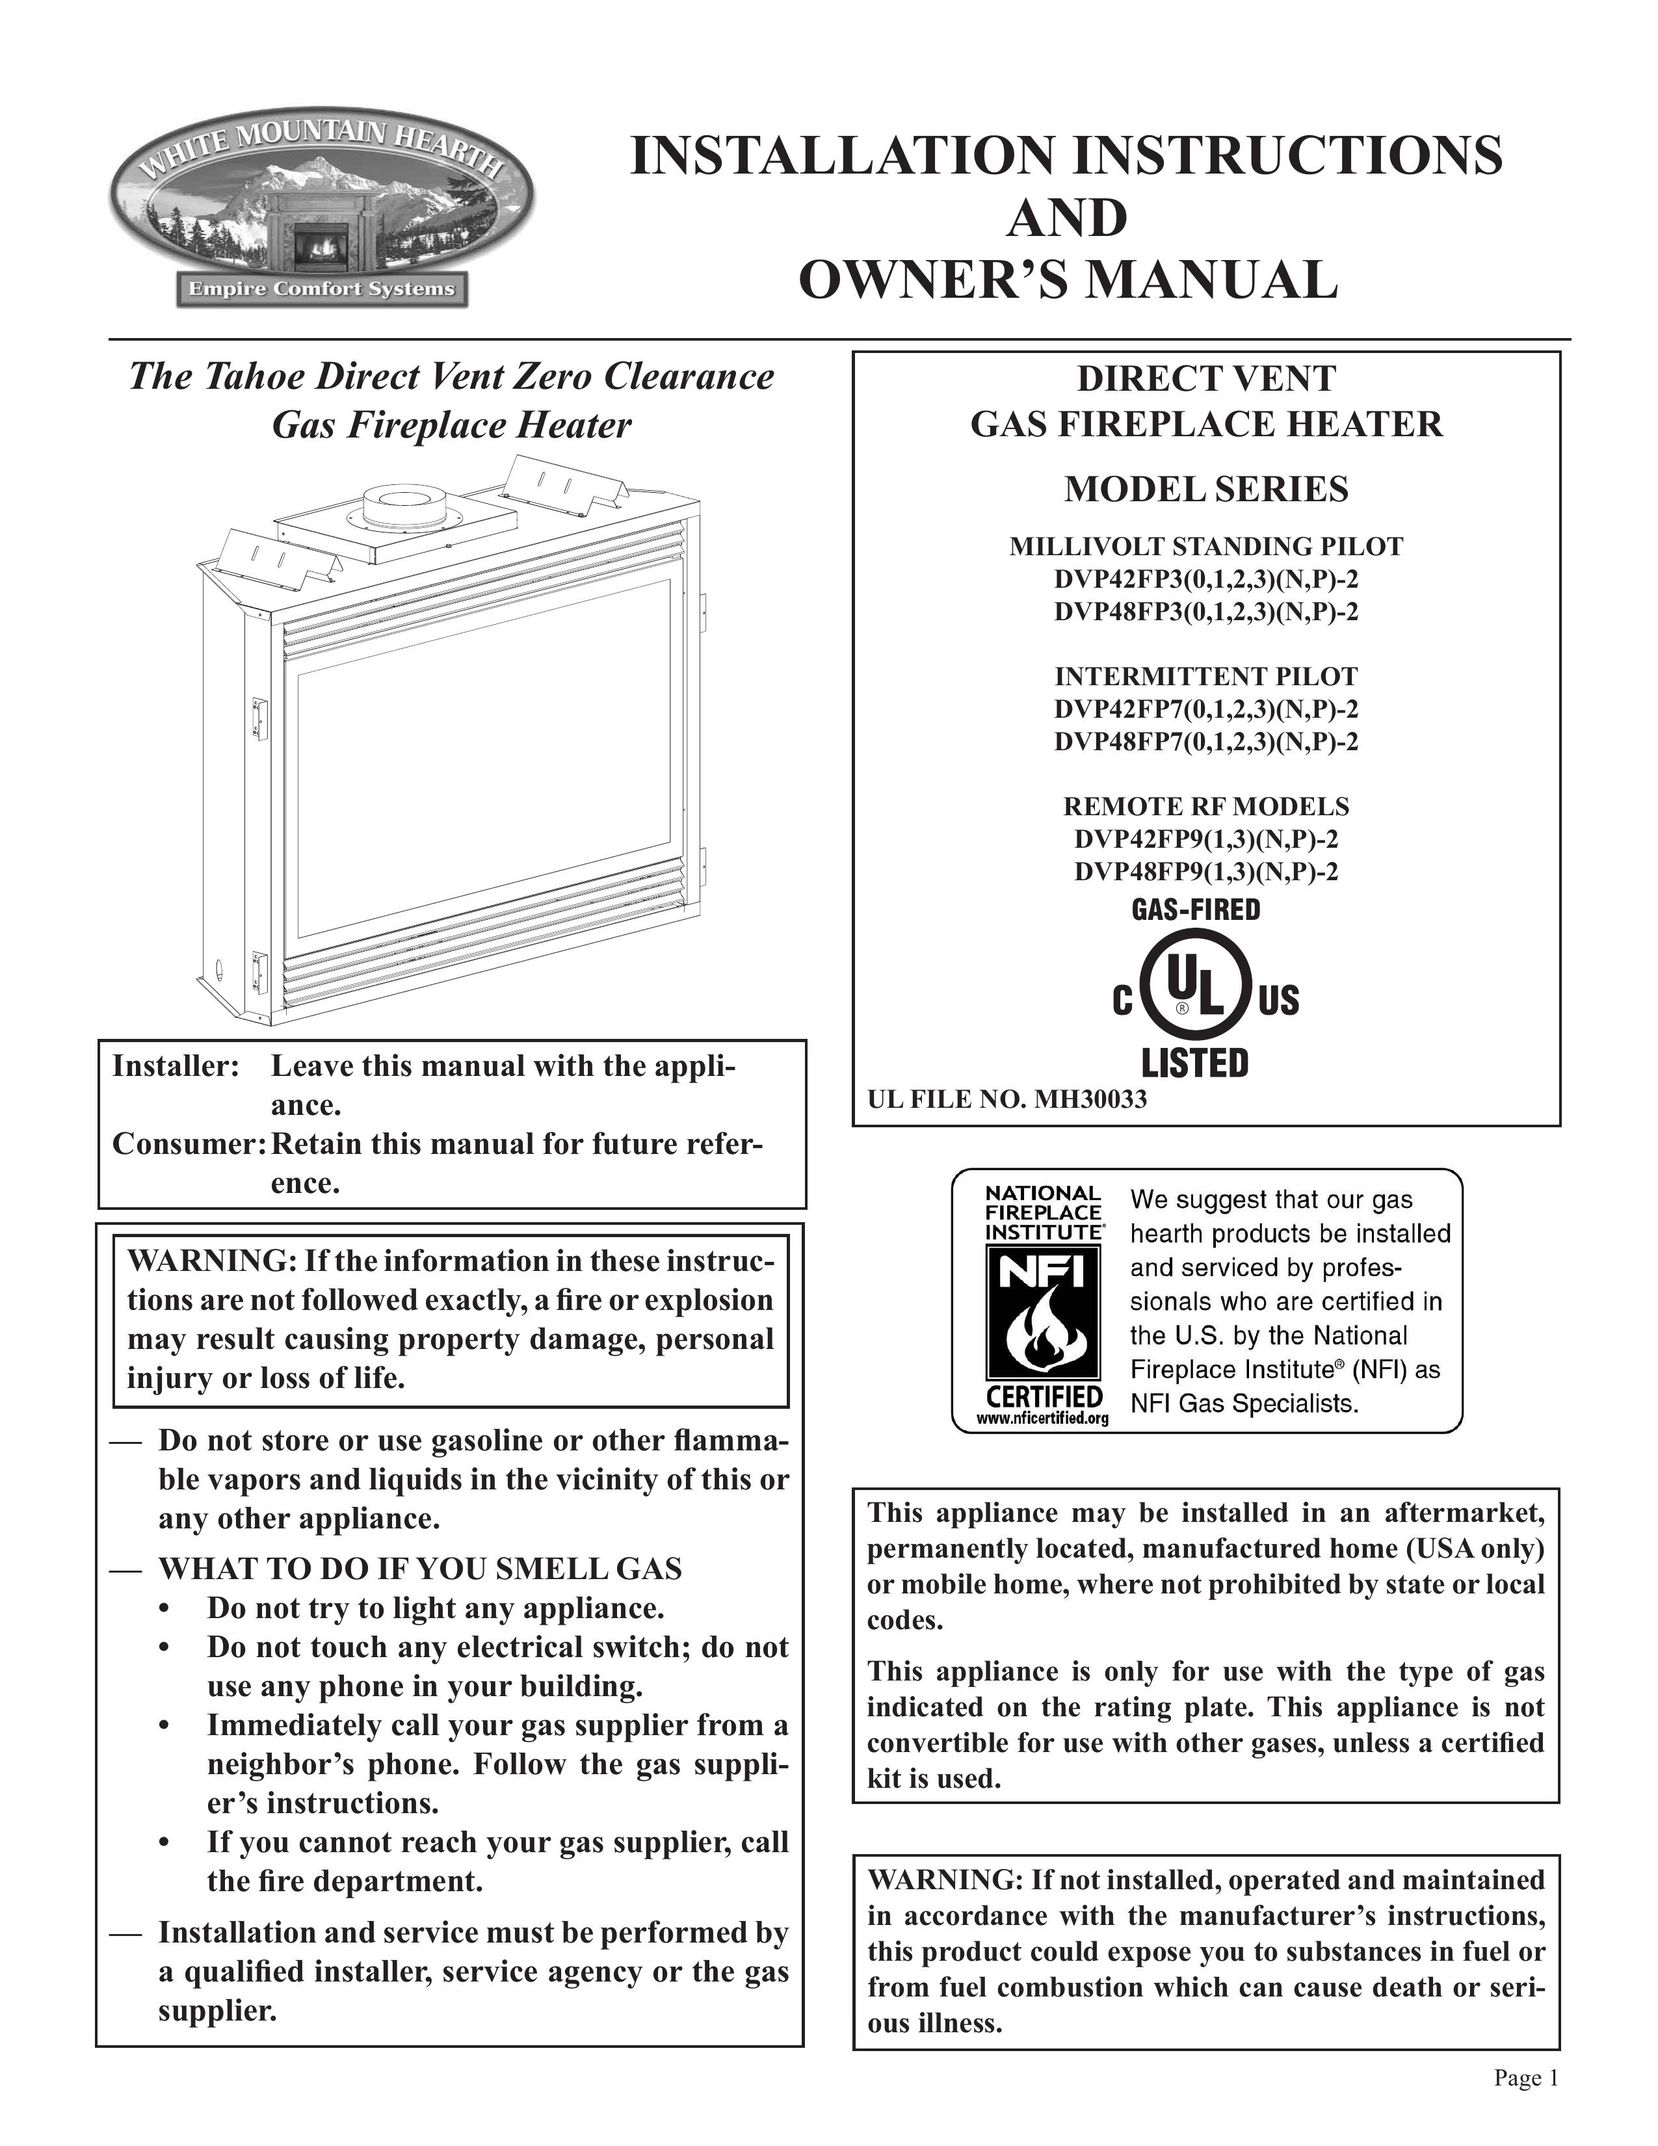 Empire Comfort Systems DVP42FP Electric Heater User Manual